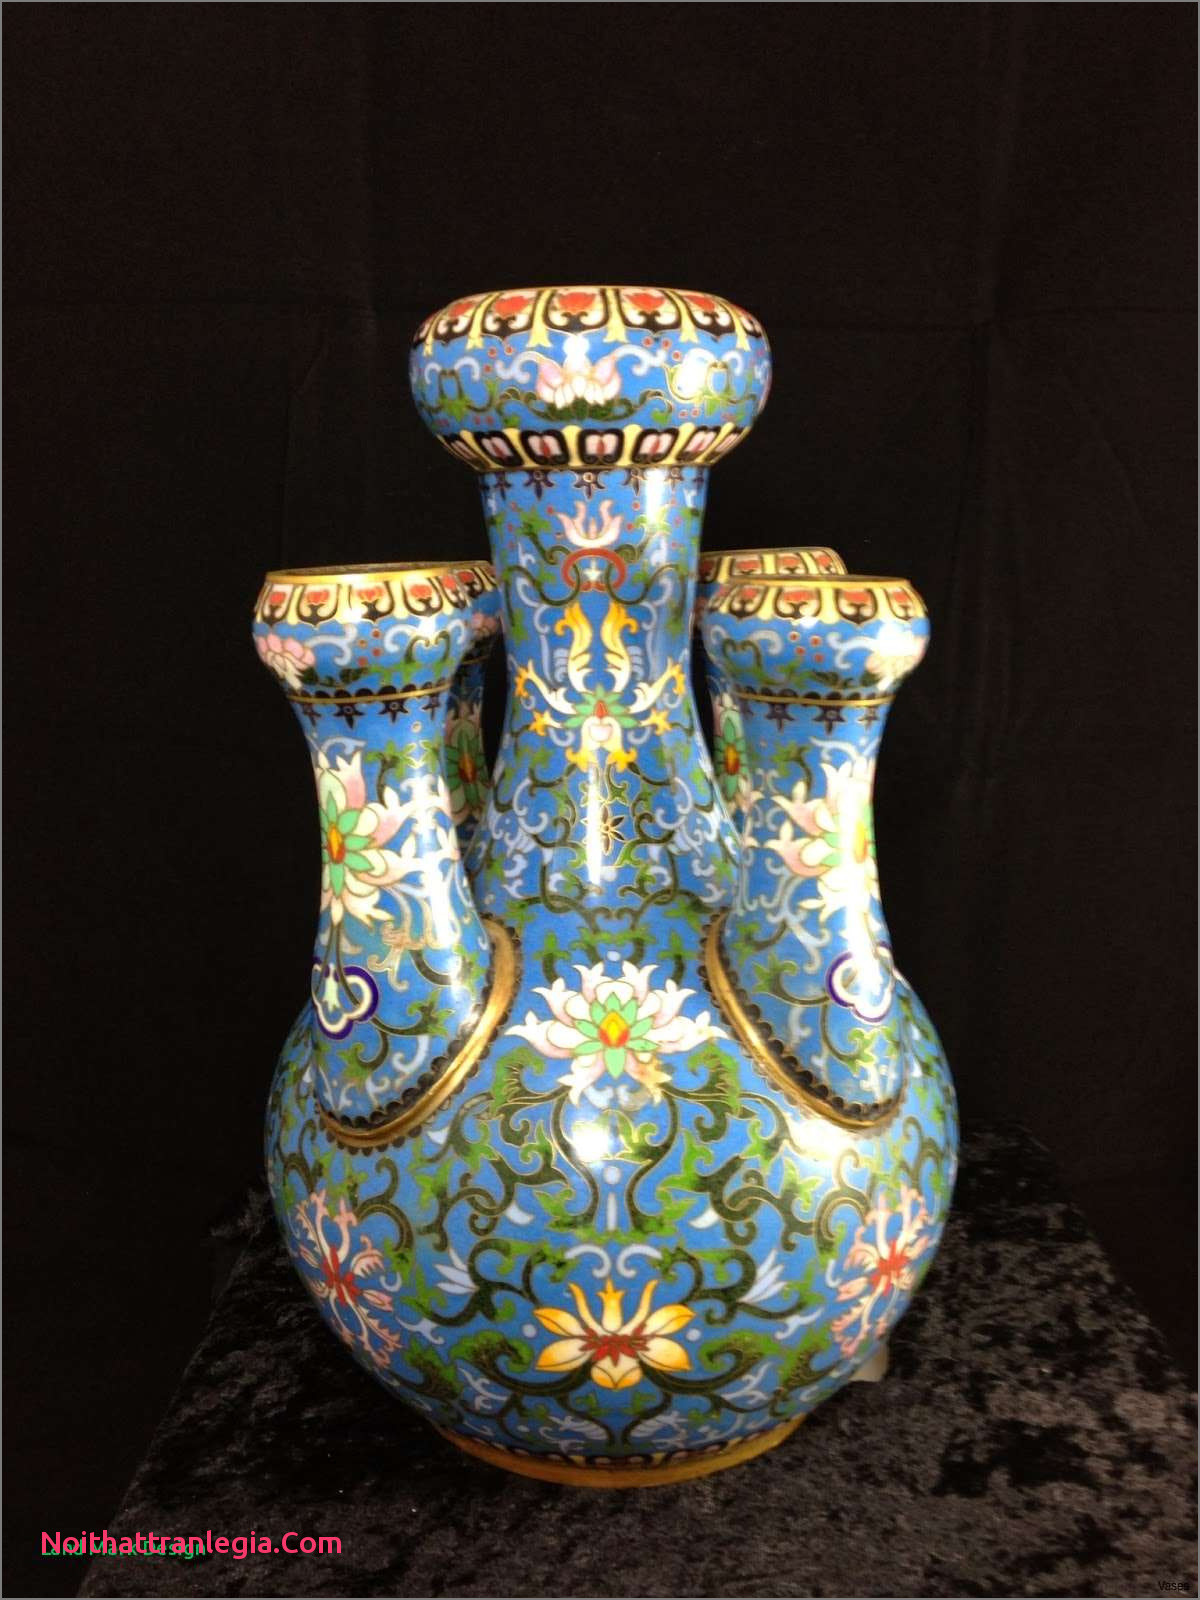 25 Cute Antique Chinese Pottery Vases 2024 free download antique chinese pottery vases of 20 chinese antique vase noithattranlegia vases design with regard to 213 1h vases antique asian the increased trade of chinese ware during 16th century has s